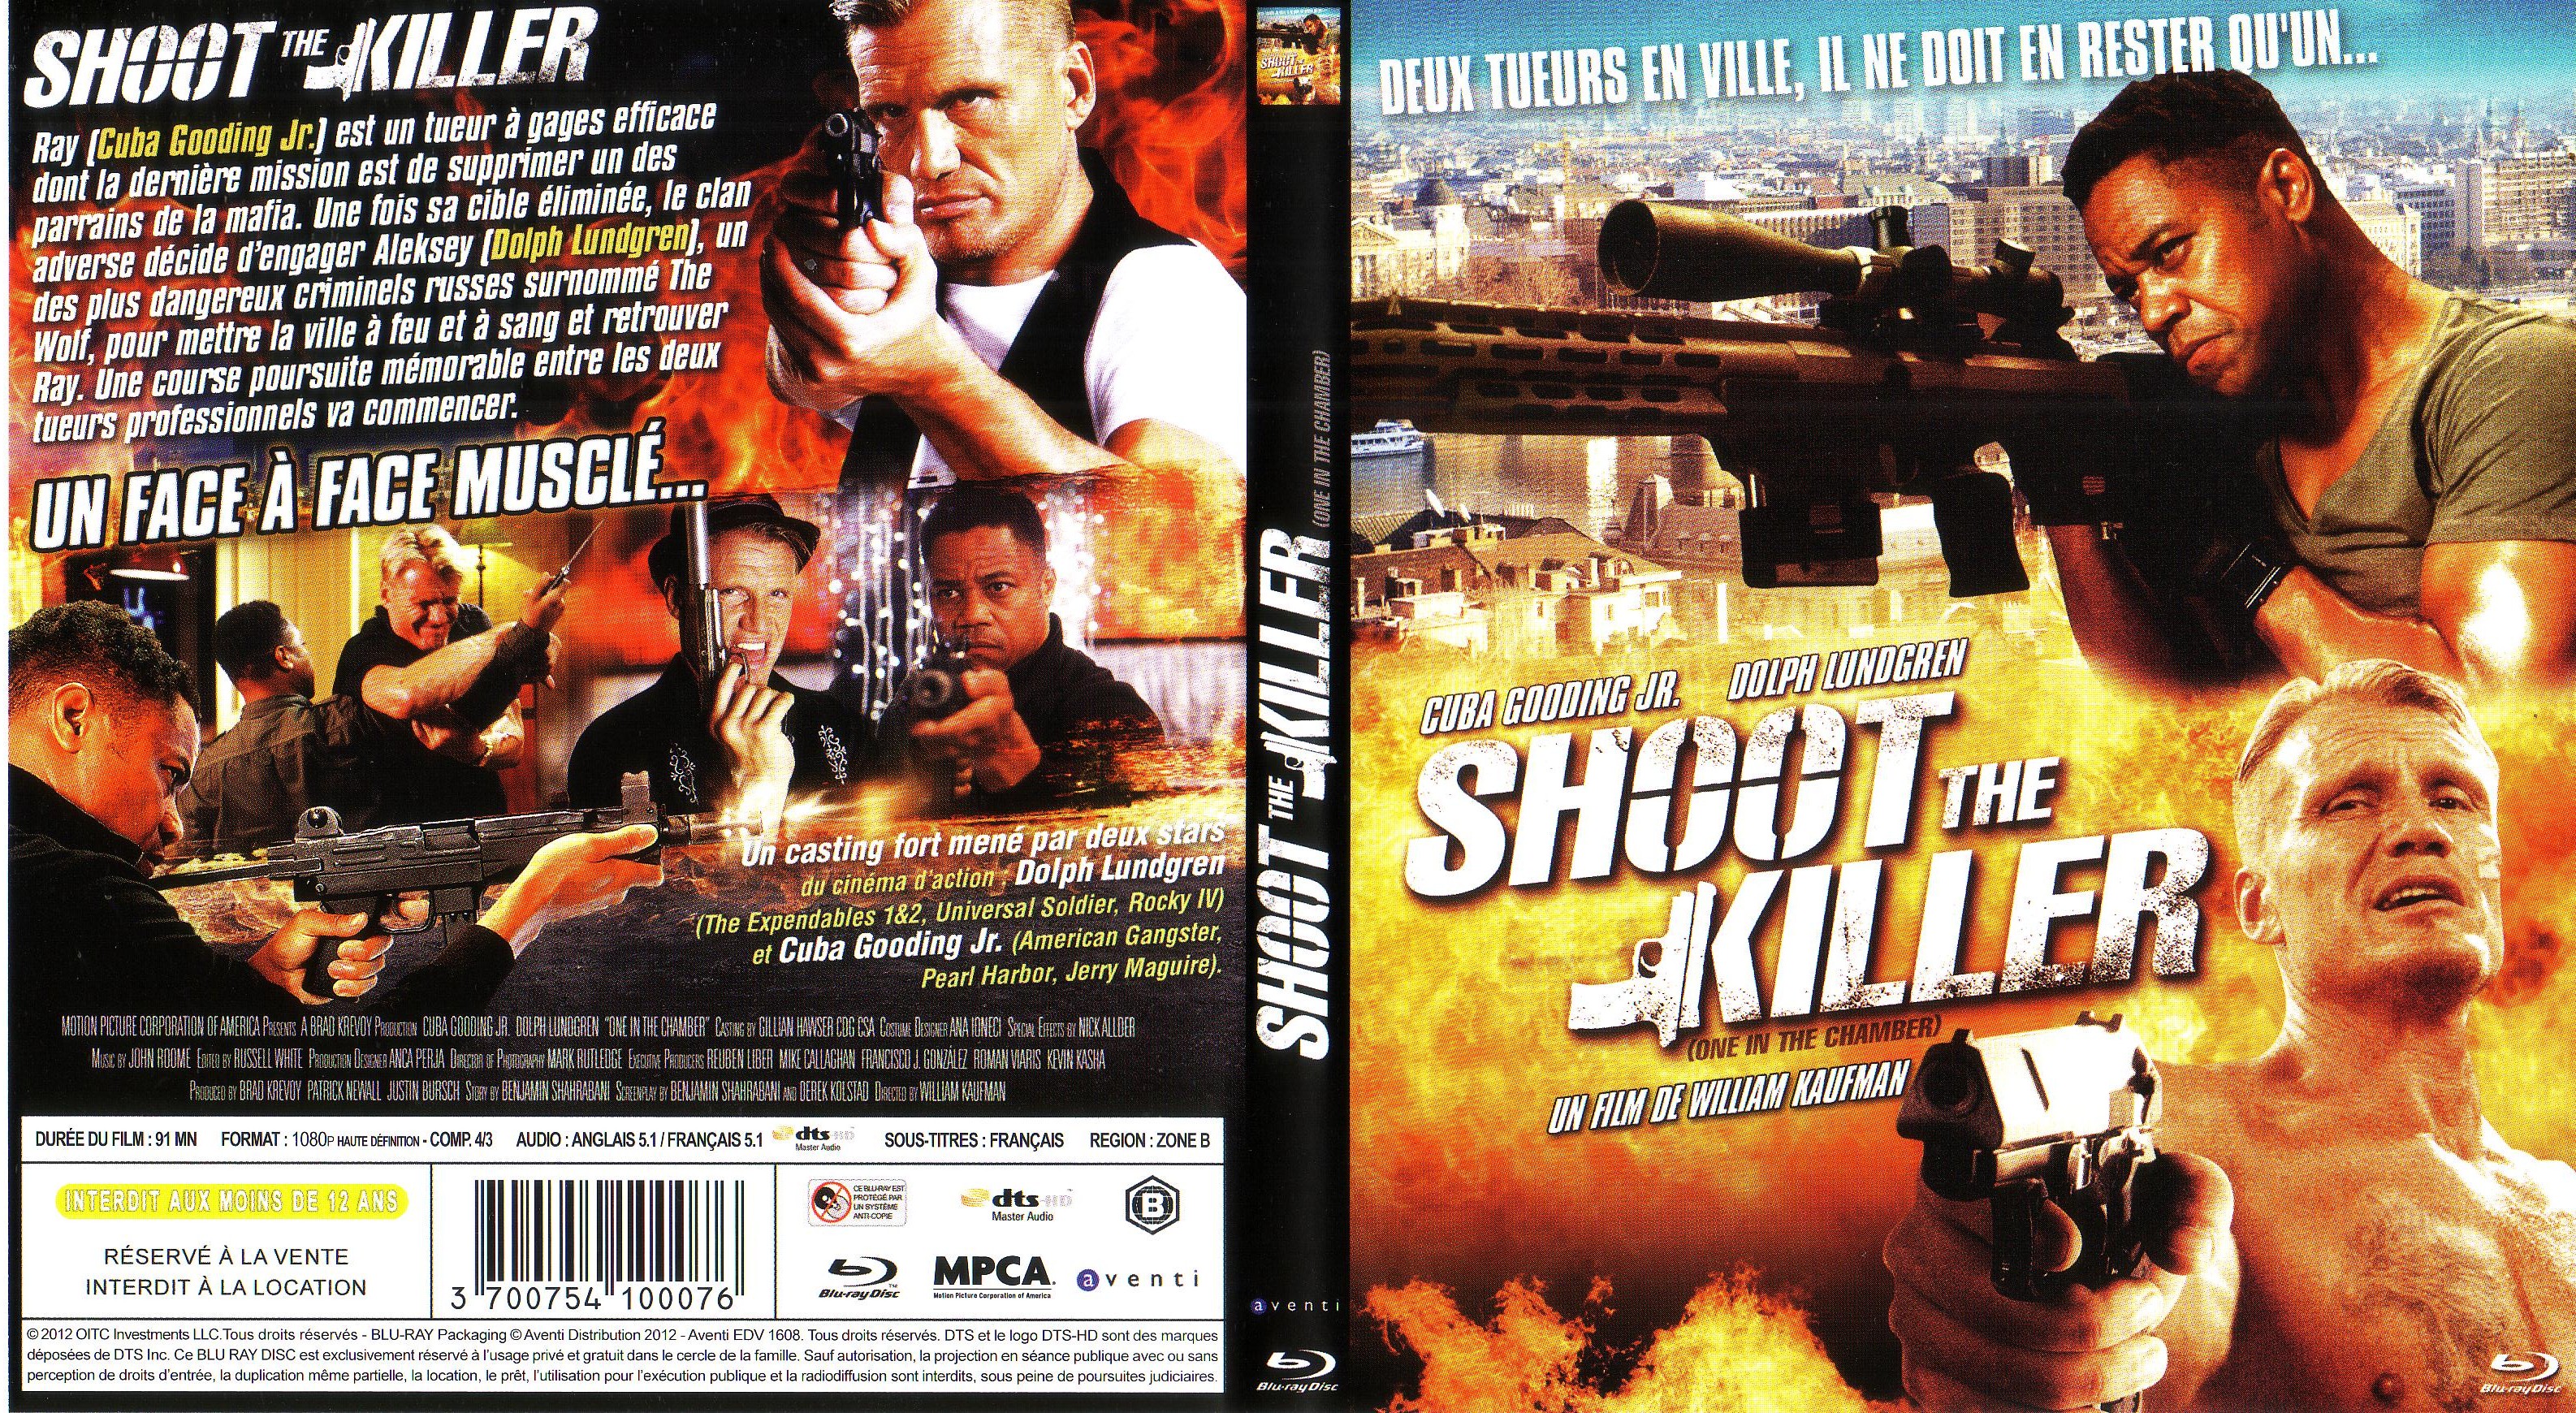 Jaquette DVD Shoot the killer (BLU-RAY)